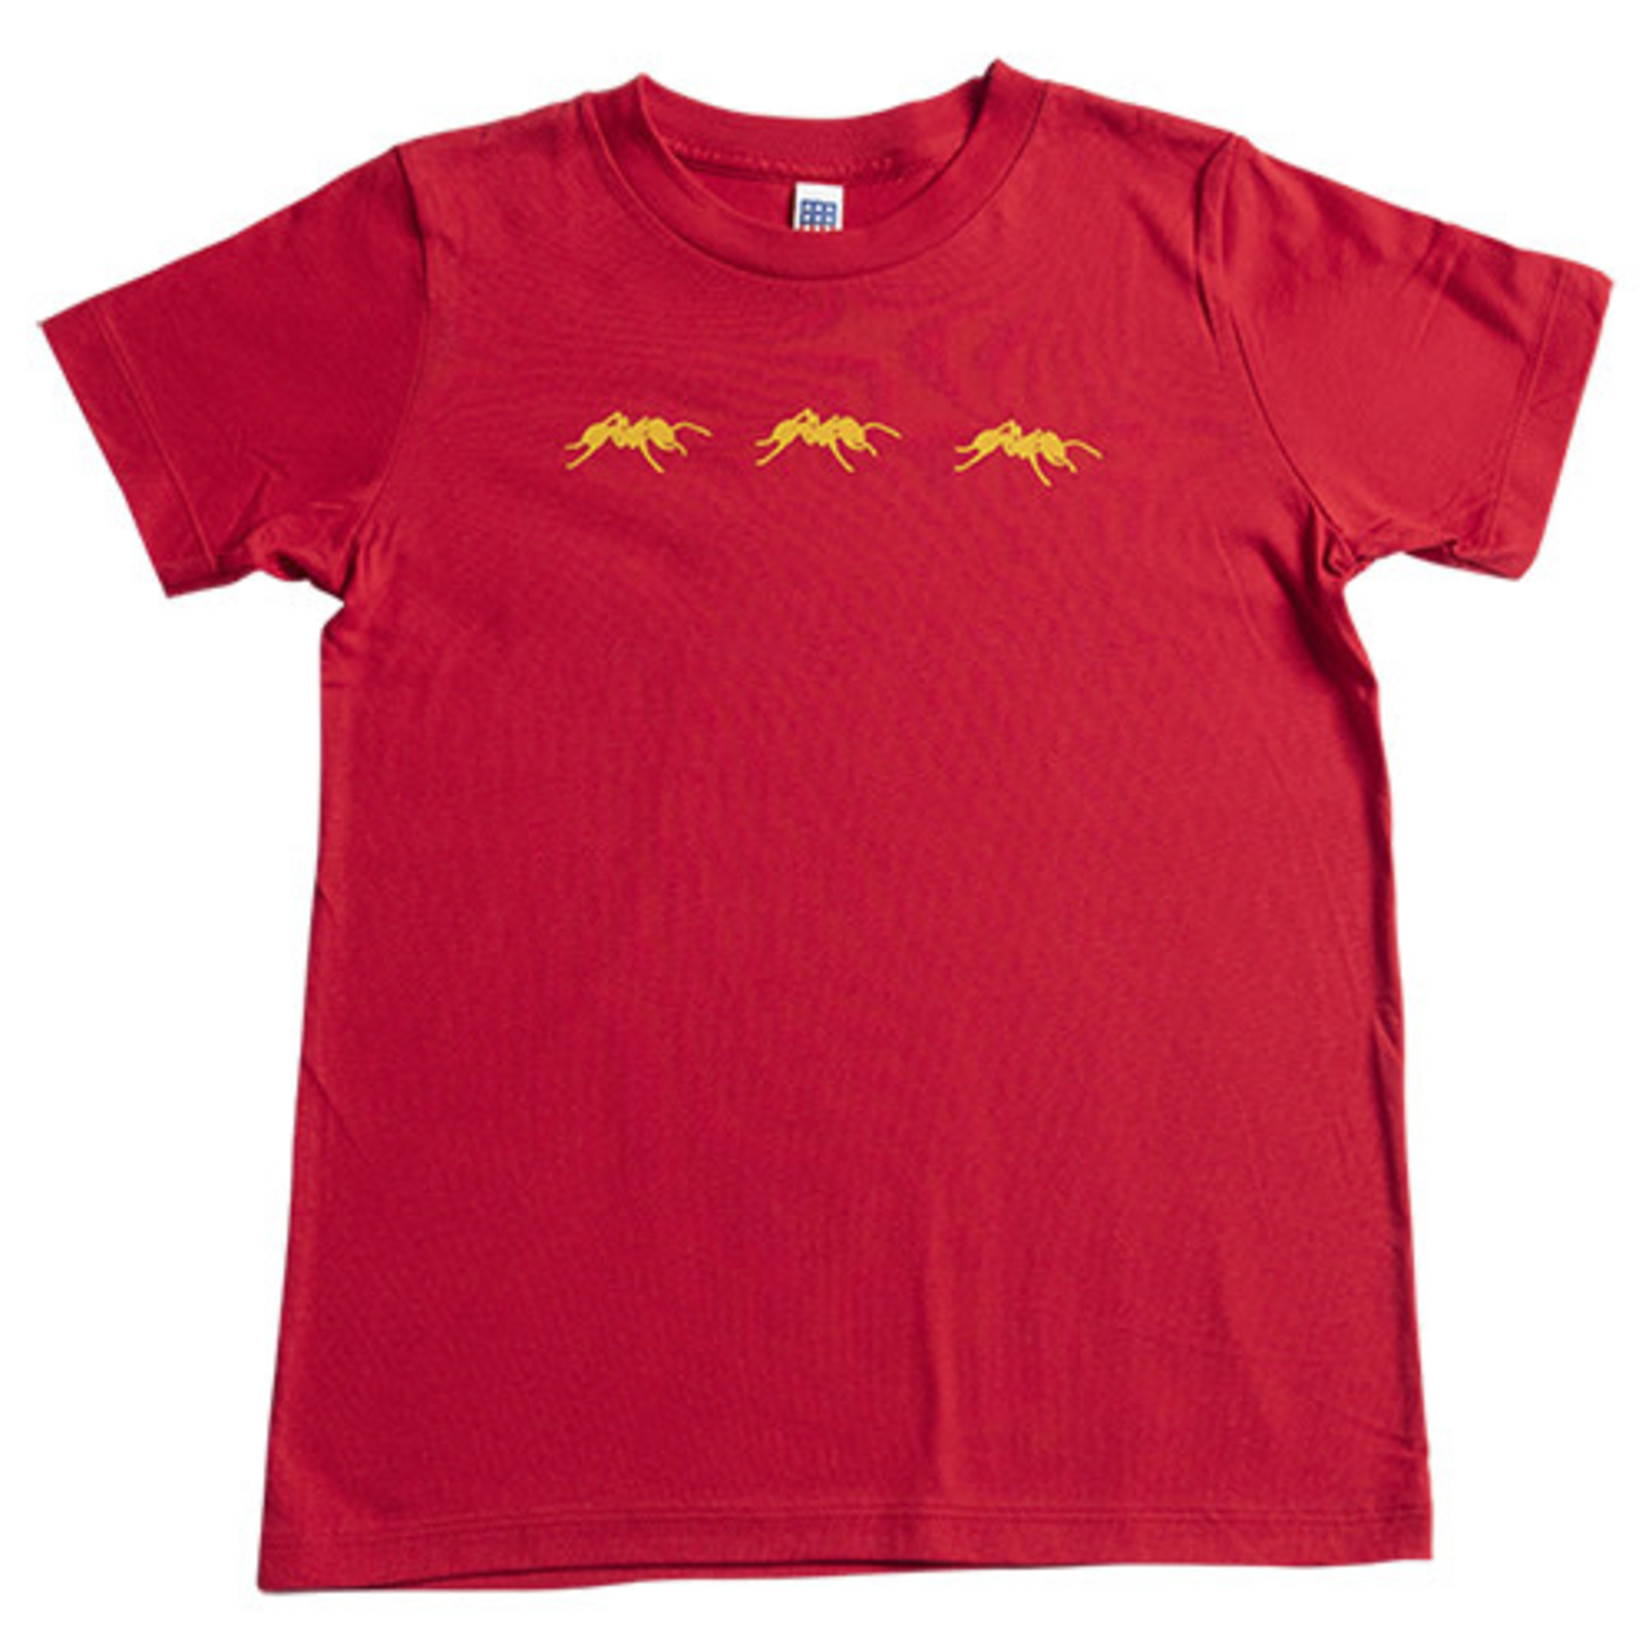 Red Ants Pants Kids Red Tee - 3 Yellow Ants